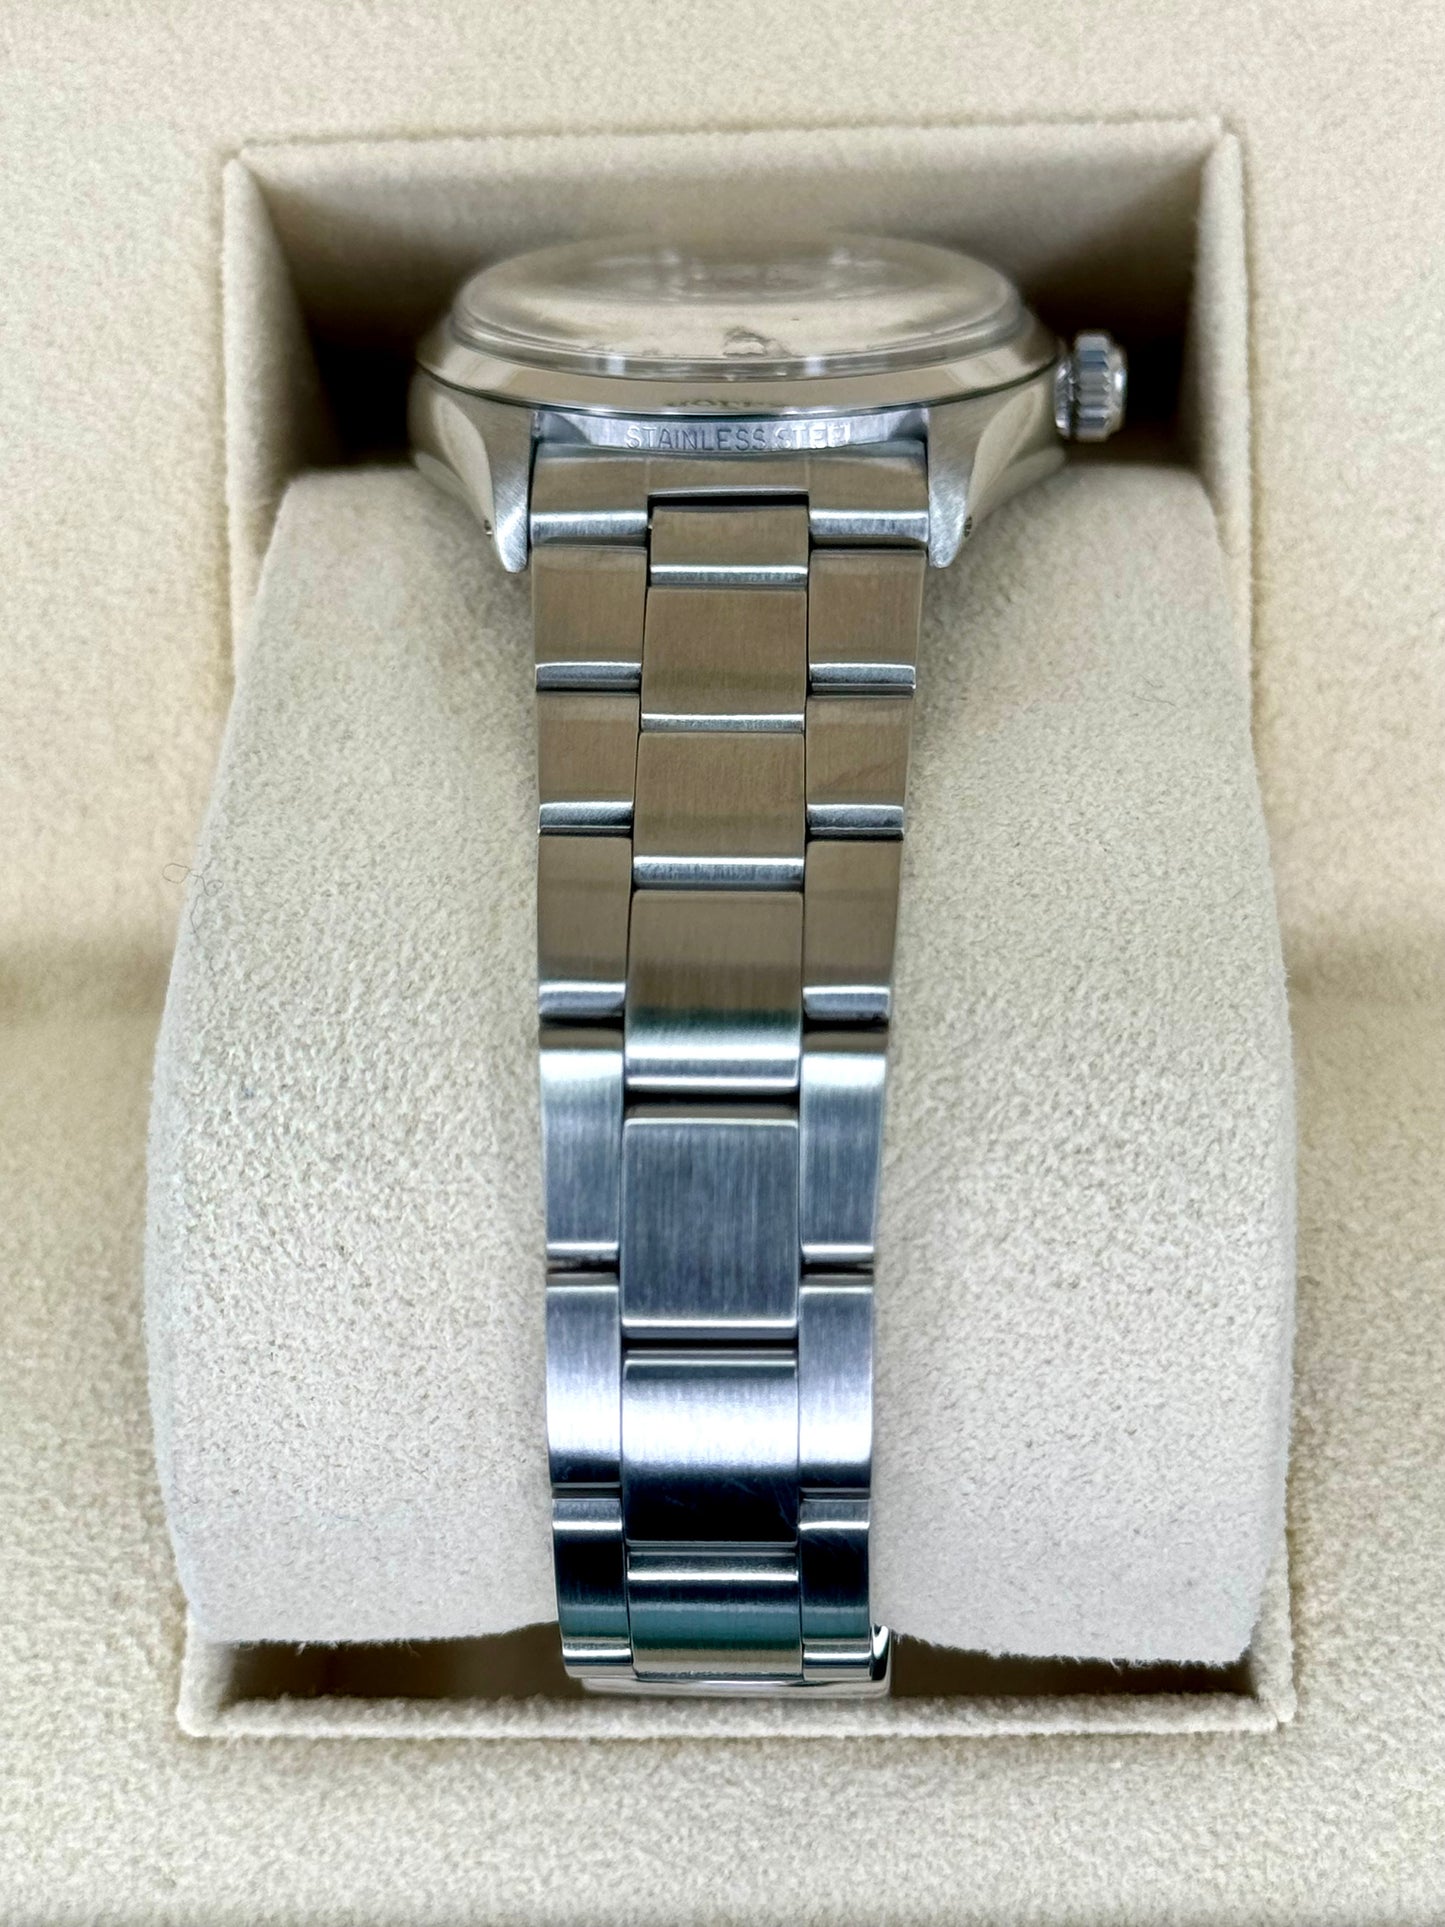 1978 Rolex Air-King 34mm 5500 Stainless Steel Oyster Silver Dial - MyWatchLLC